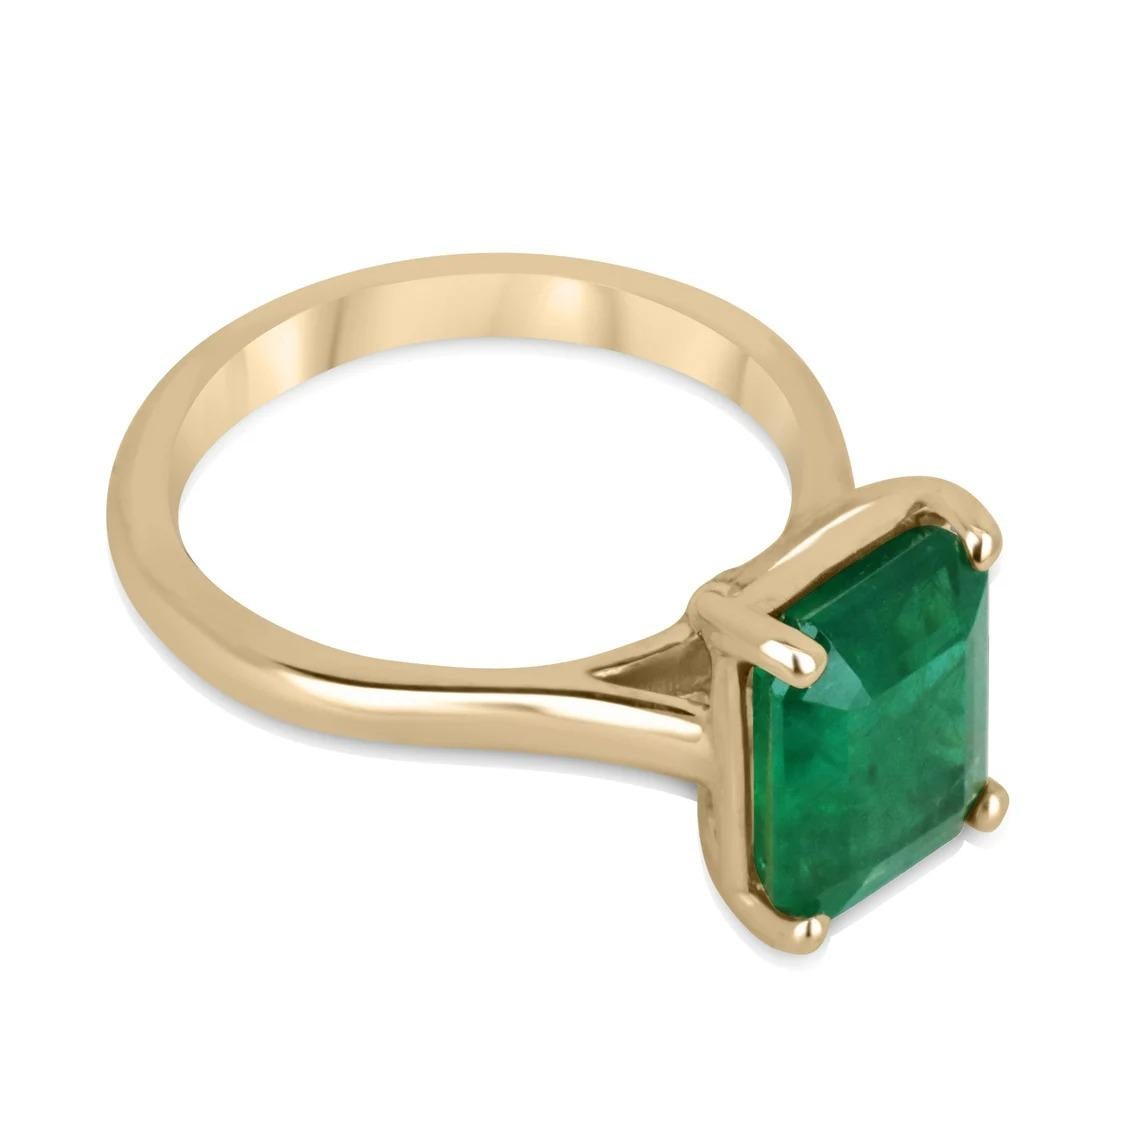 This stunning solitaire ring boasts a remarkable 3.95-carat emerald as its centerpiece, exuding timeless elegance and sophistication. The emerald cut stone has a gorgeous rich green color with a yellowish-green hue, and very good luster, making it a